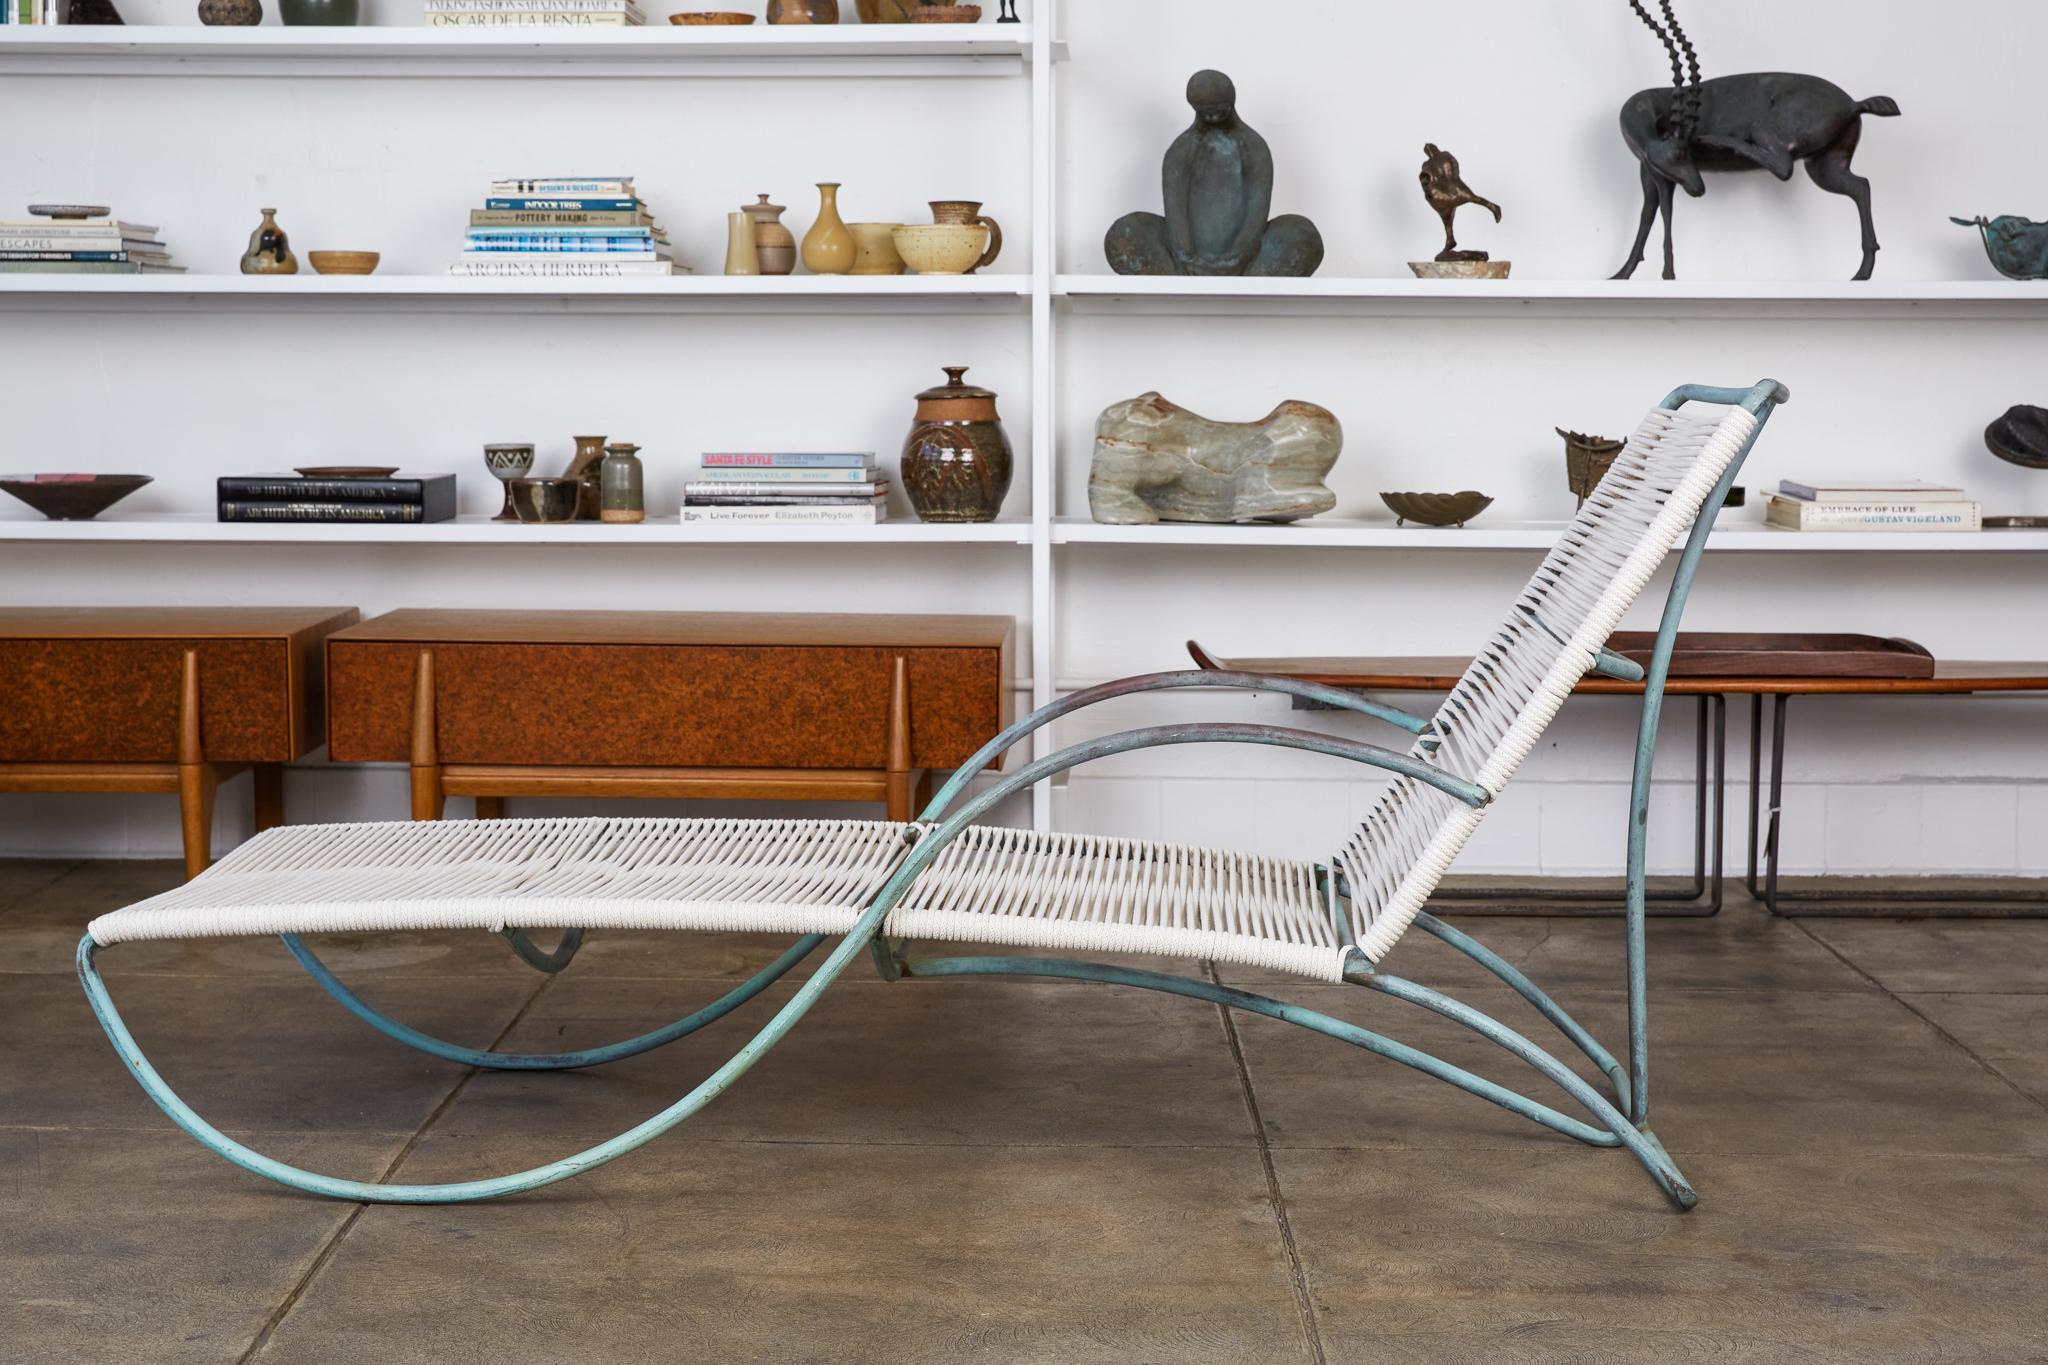 A single S-lounge patio chair by Walter Lamb for Brown Jordan. Graceful even for a Lamb design, the chaise lounge is rendered in bronze tubing with a seat of woven yacht cord. Its namesake armrest draws a serpentine curve from the backrest to the